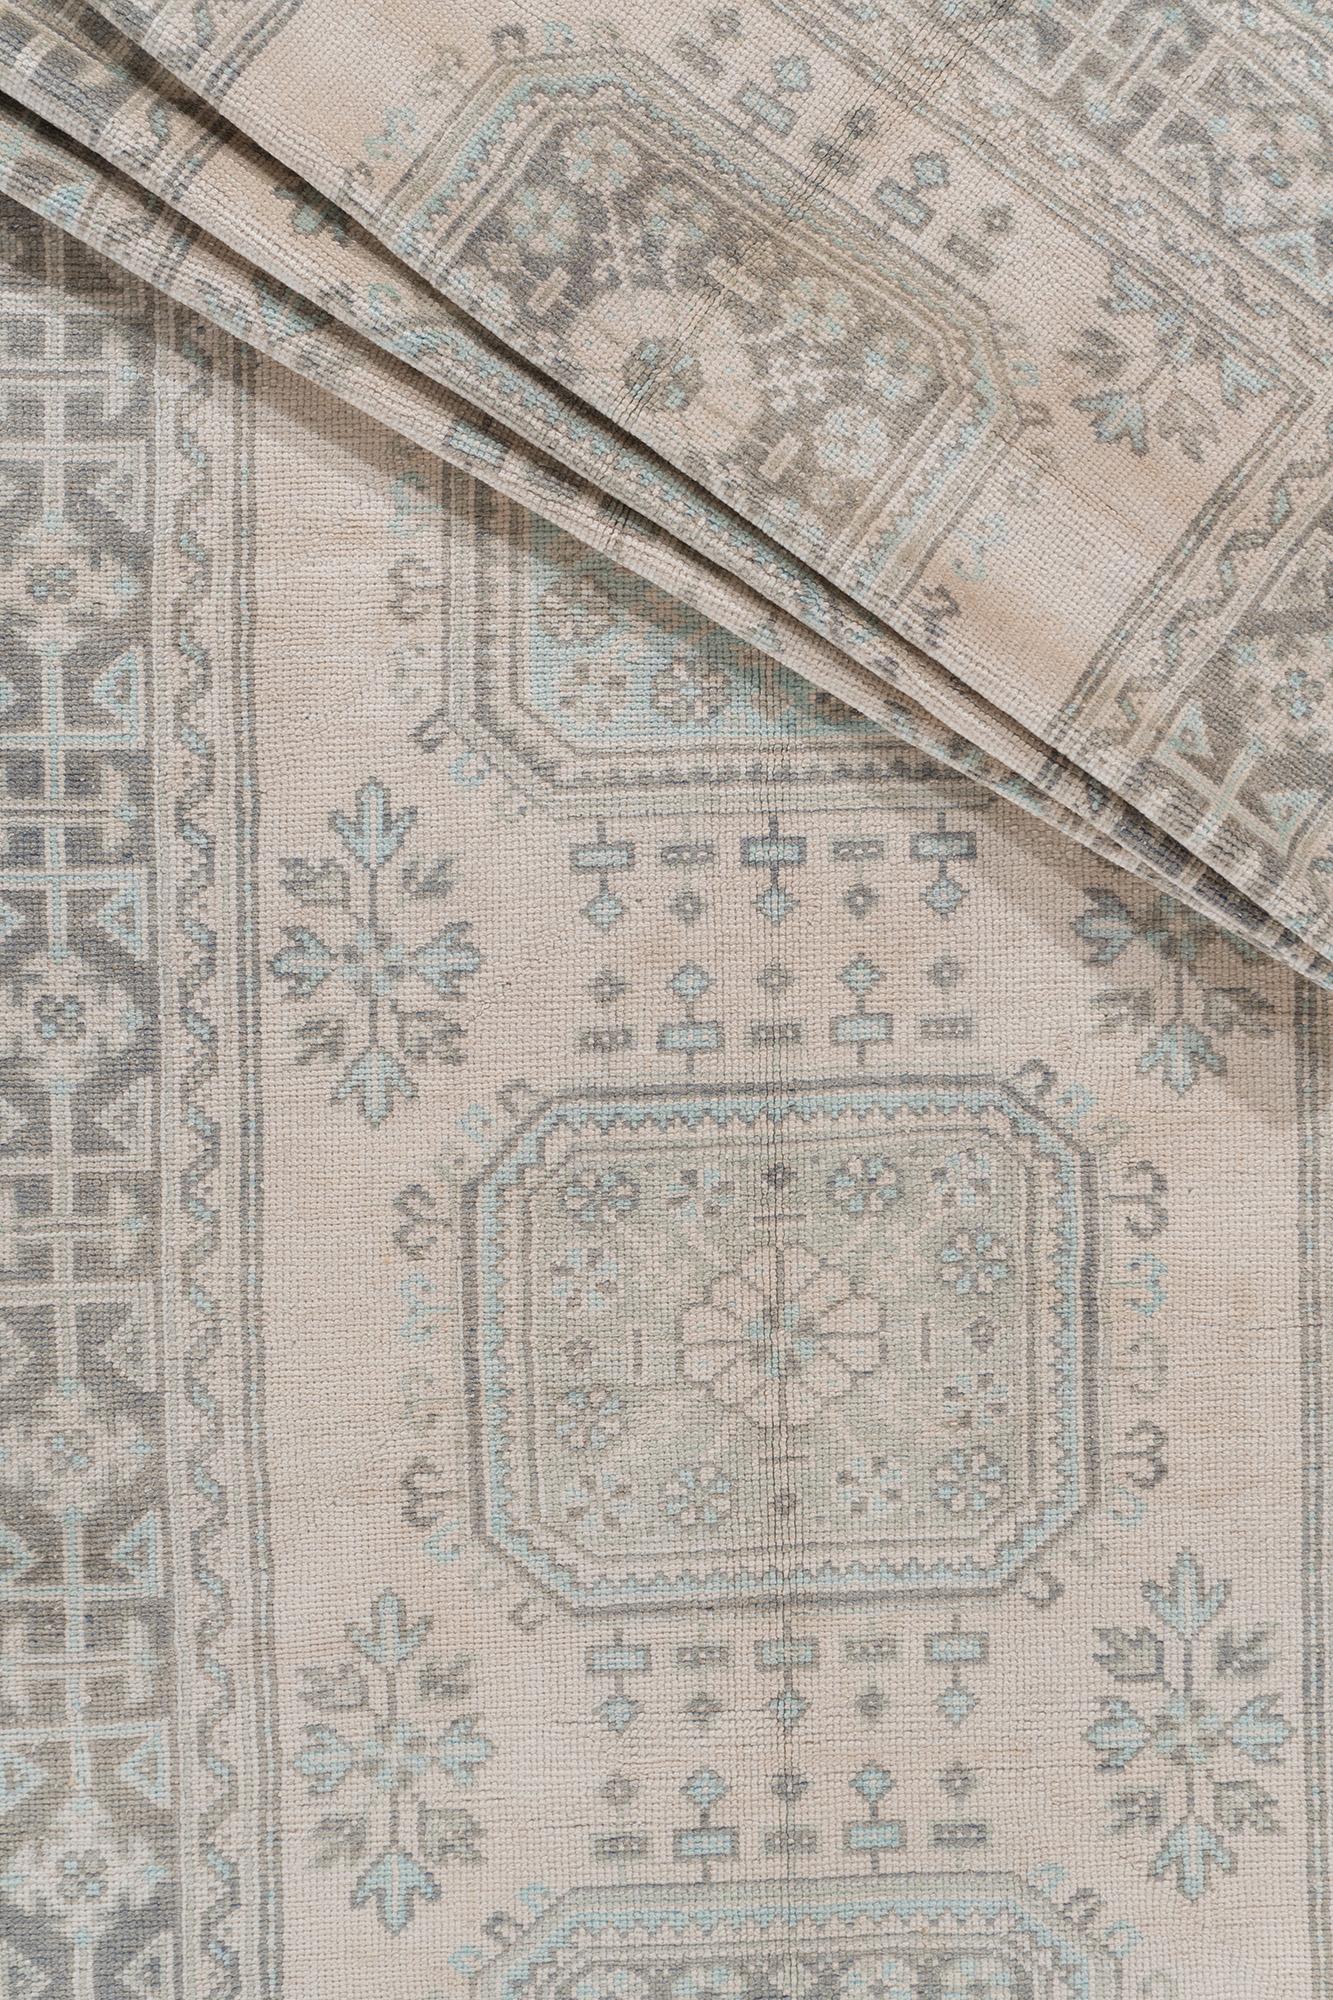  Vintage Oushak Anatolian Runner 4'5 X 10'11. Light colored Oushaks are among the most popular oriental carpets, known for the high quality of their wool their beautiful patterns and warm colors. These designer favorites will complement any